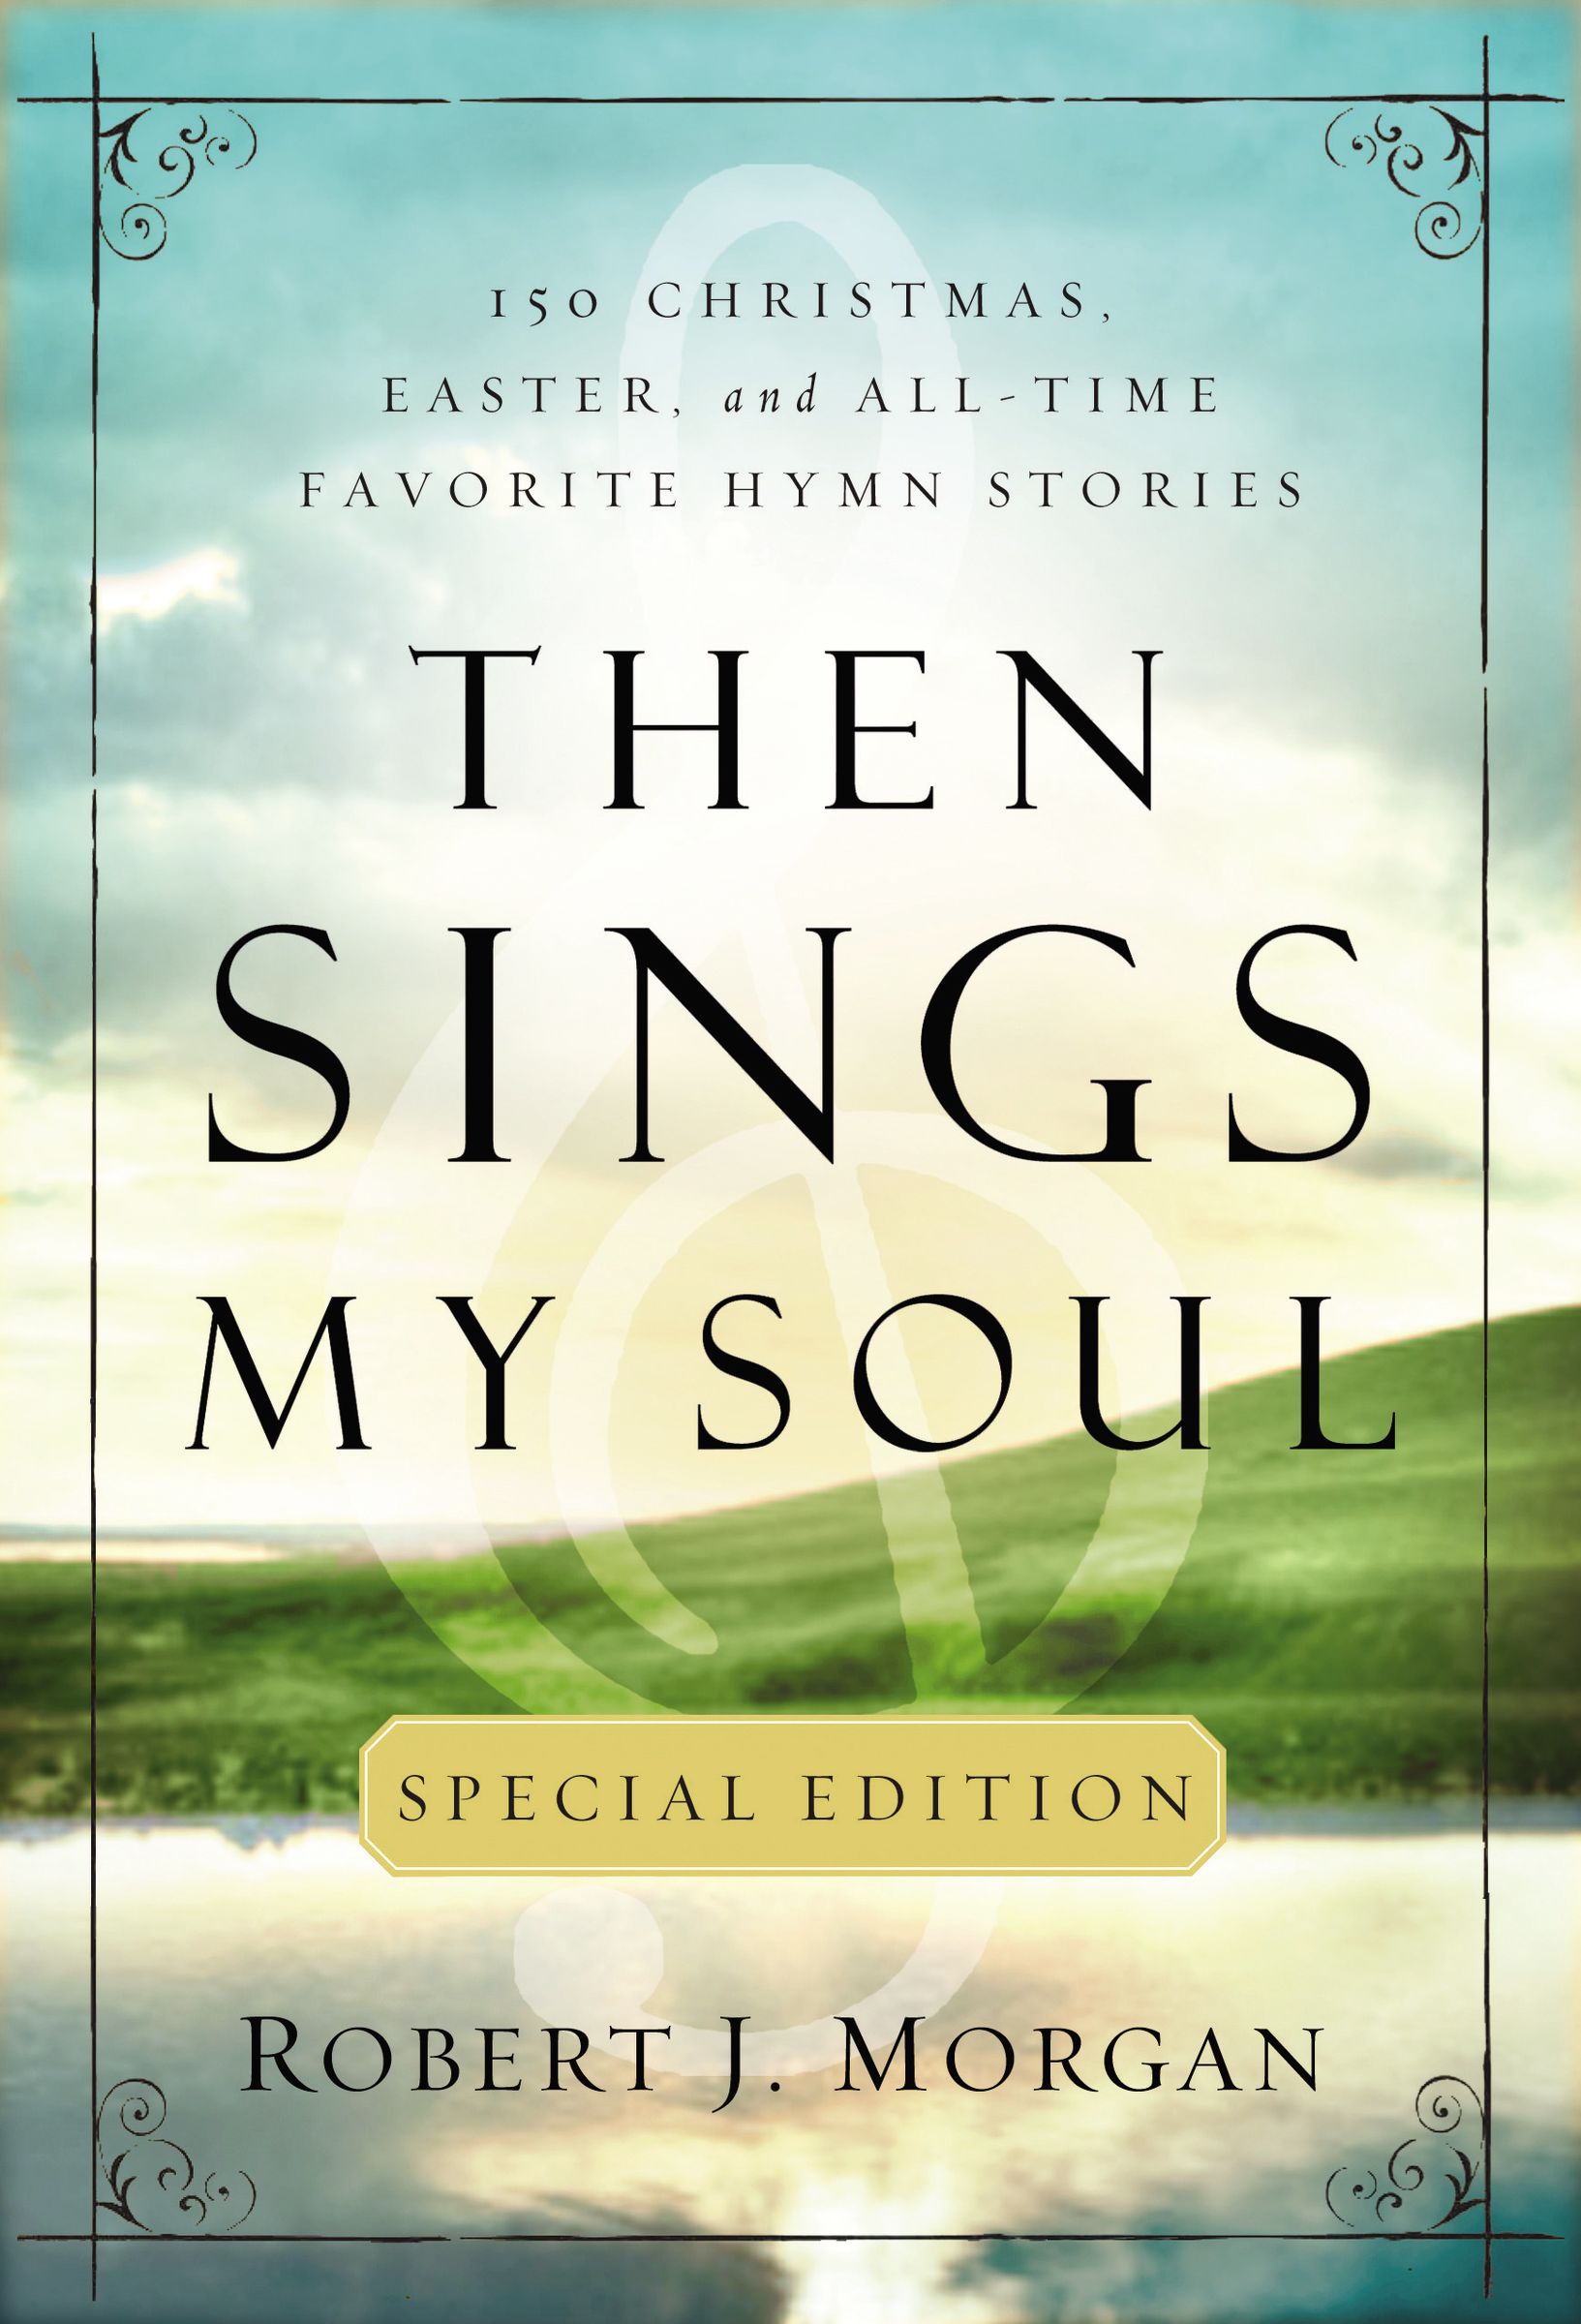 Image of Then Sings My Soul Special Edition other